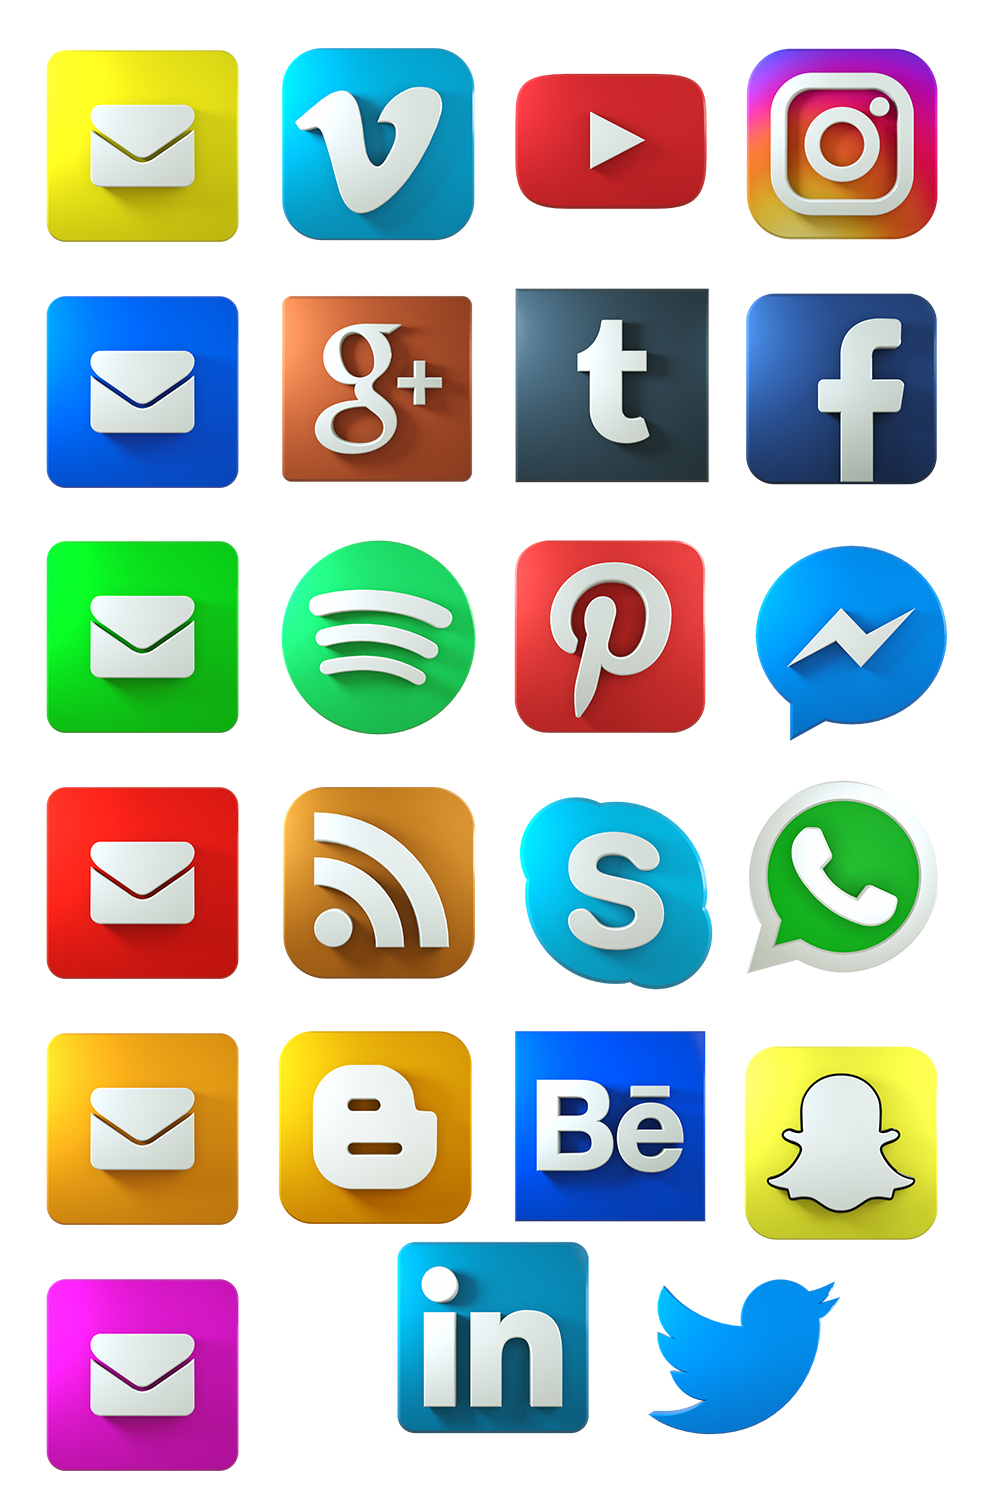 Set of 23 Social Media 3d Colorful Icons Pinterest image.